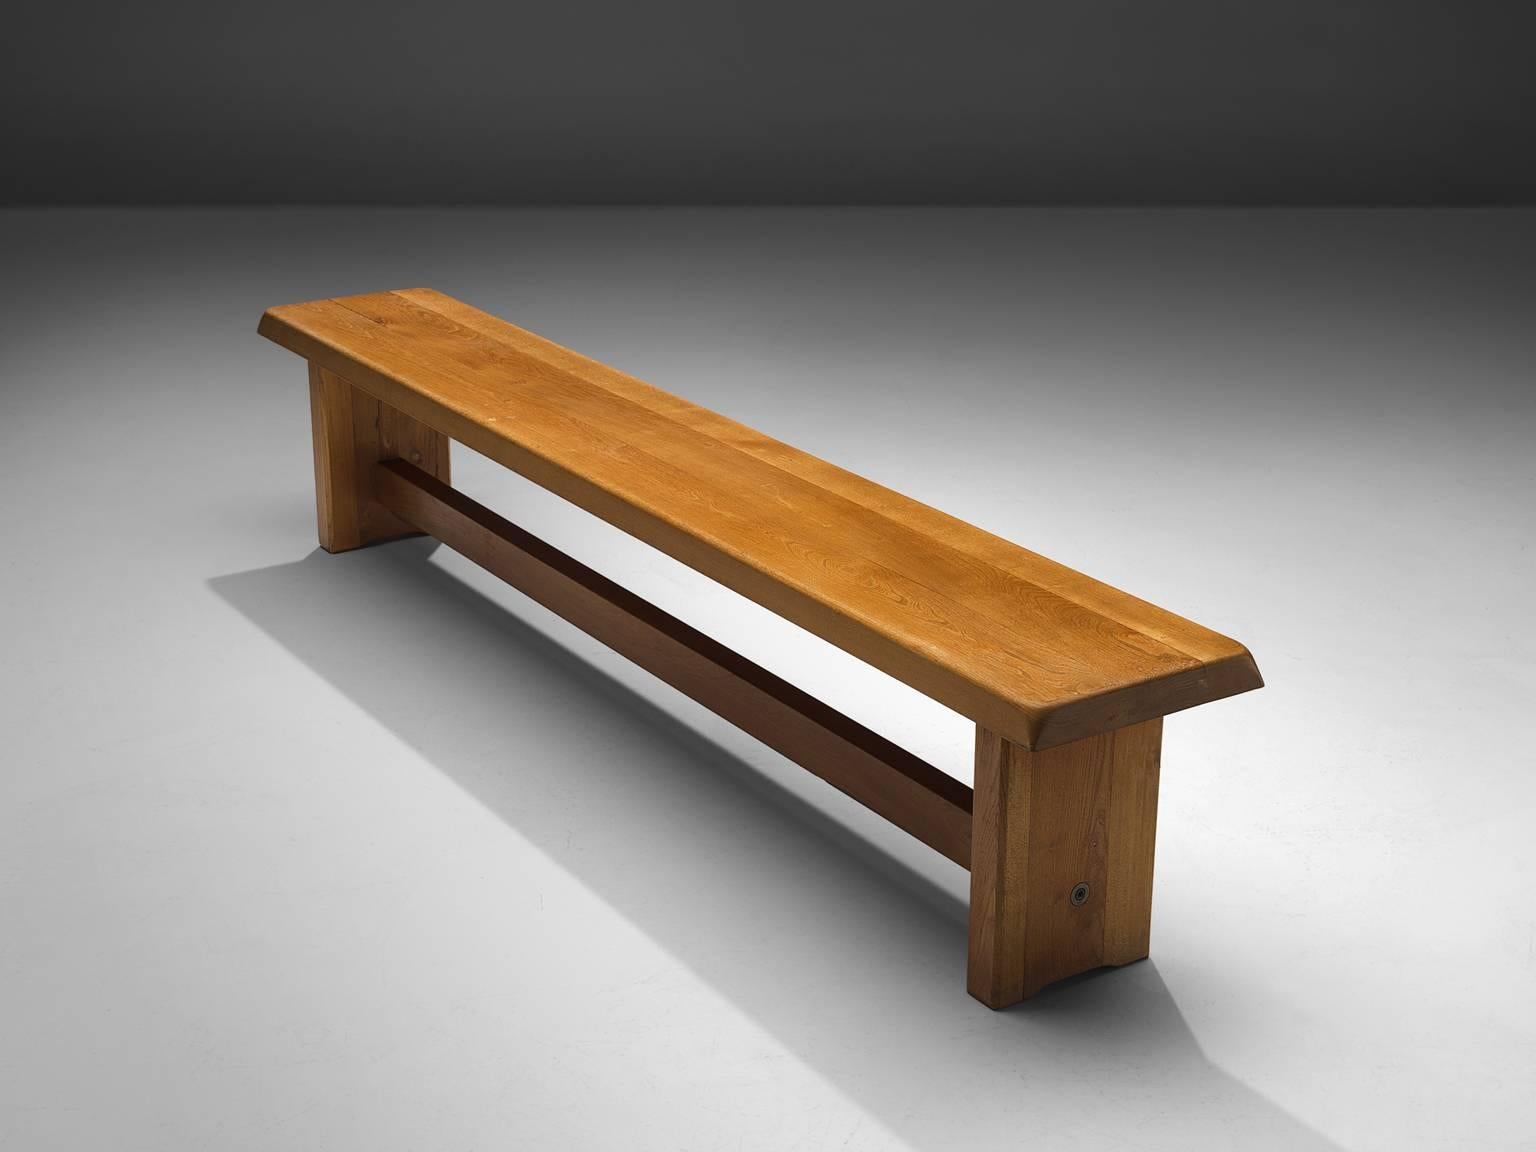 Pierre Chapo, bench S14D, elm, France, 1950s. 

This elm bench is designed by the French designer Pierre Chapo. The rectangular top features sloping edges, rests on a two-legged base with a connecting horizontal beam. The strong an simplified design